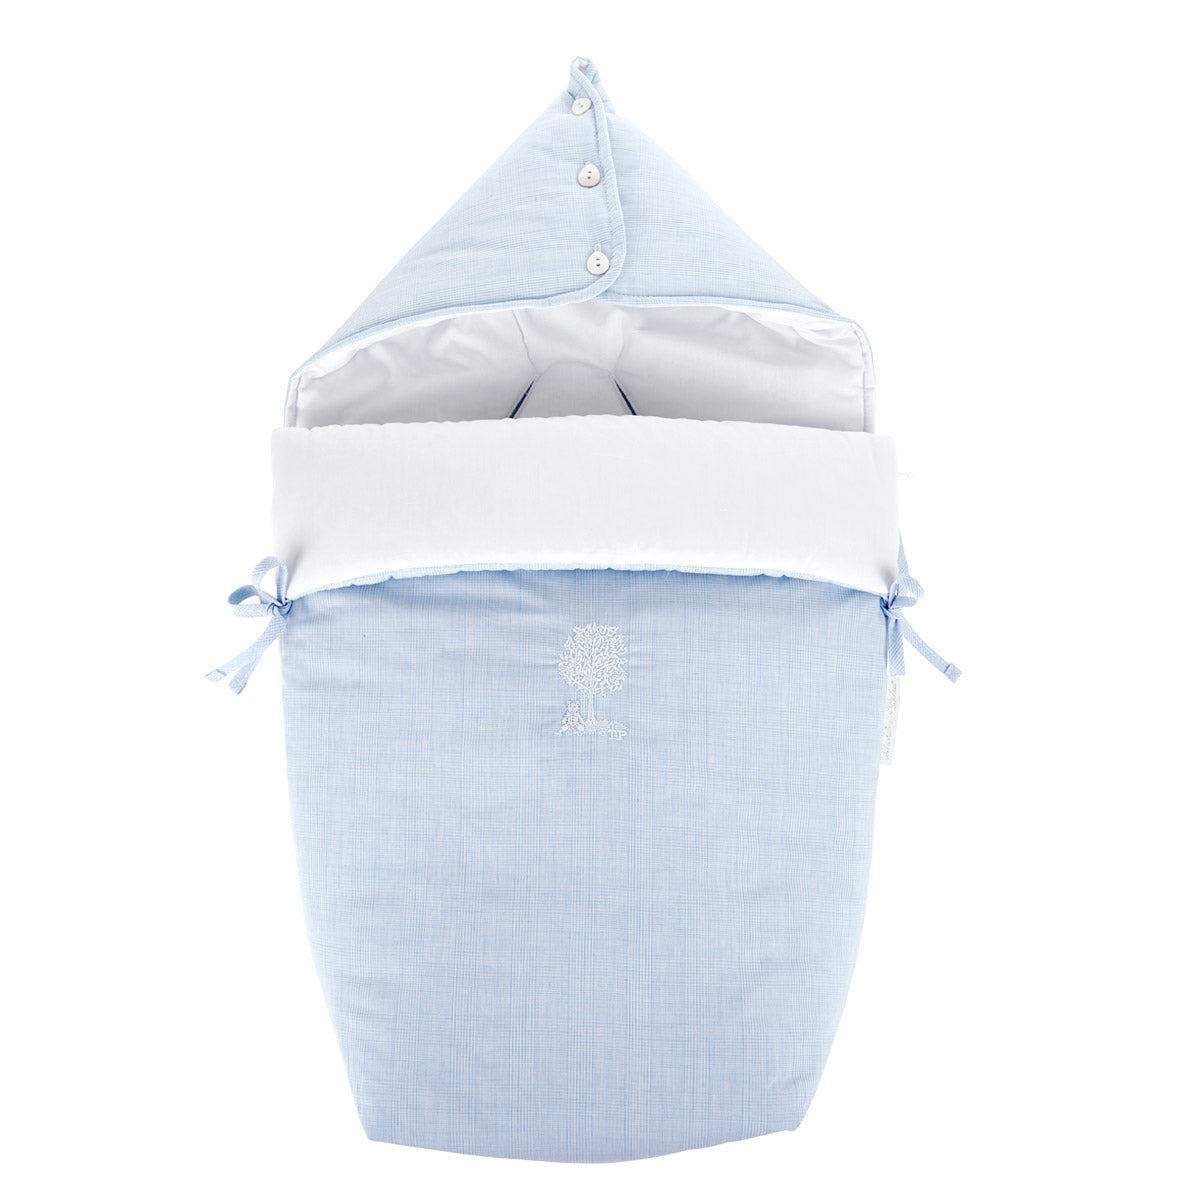 Theophile & Patachou Hooded Sleeping Bag for Car Seat “Pebble” - Sweet Blue